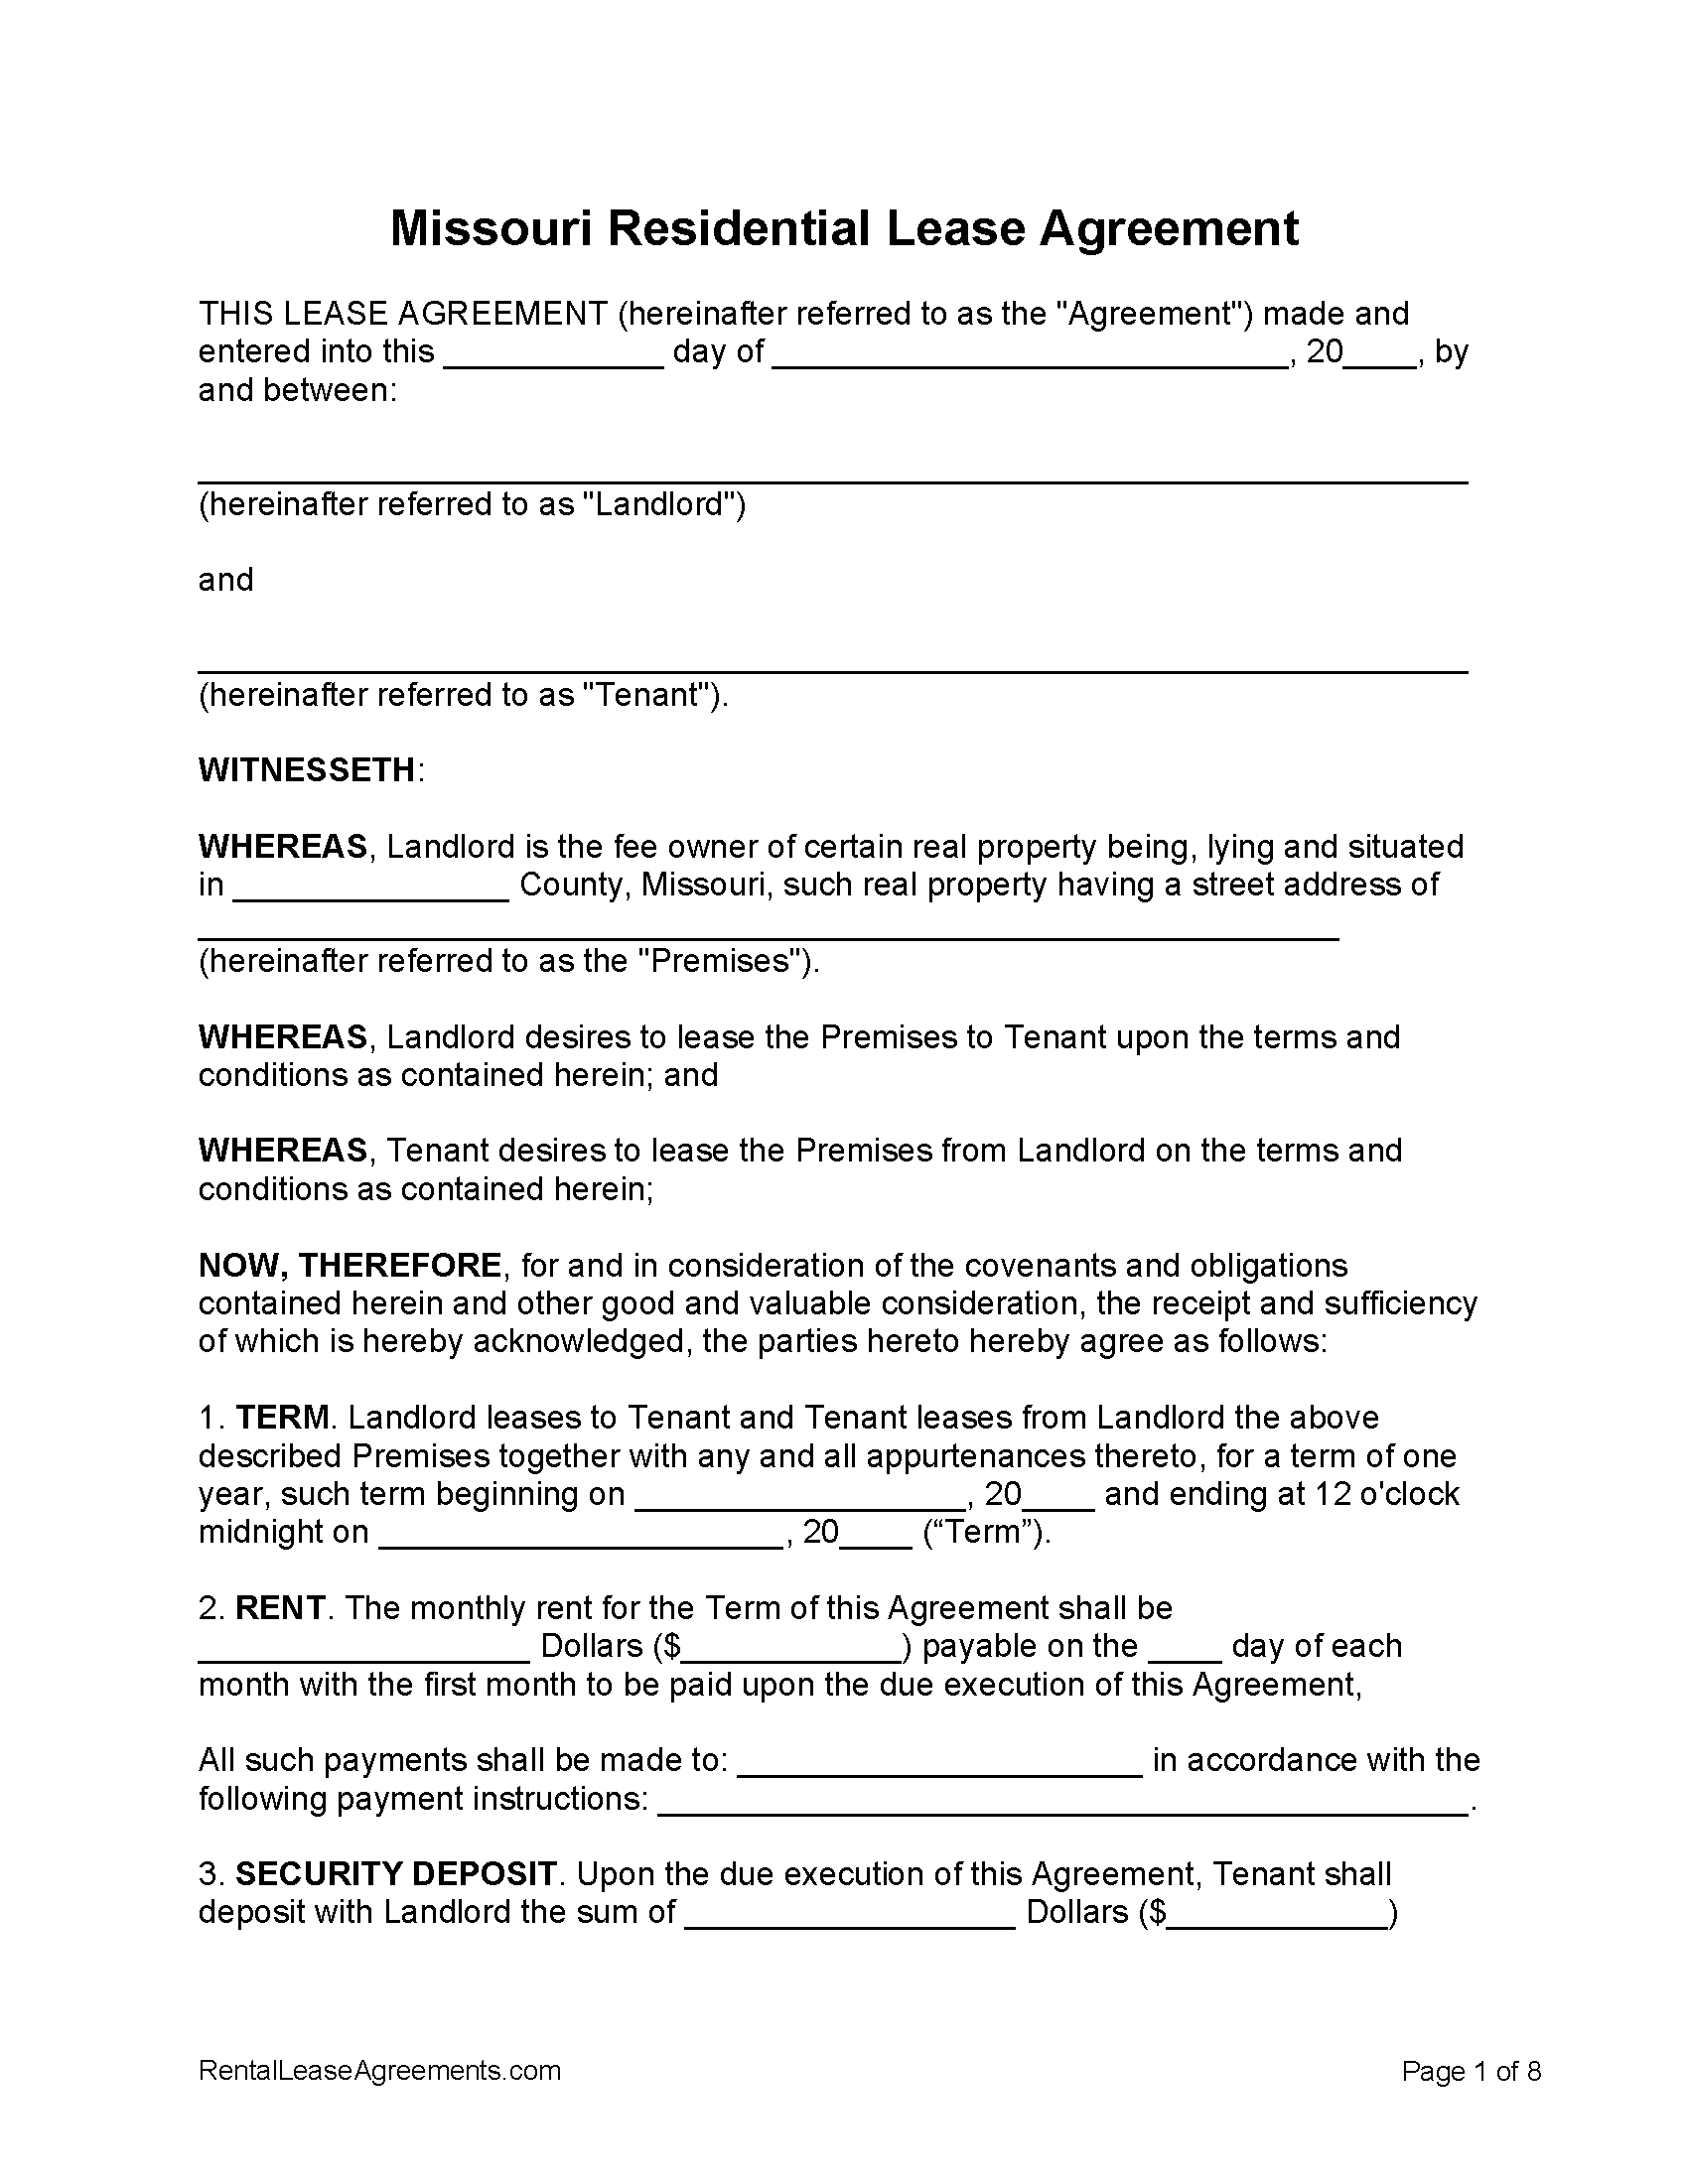 Missouri Residential Lease Agreement Printable Form, Templates and Letter